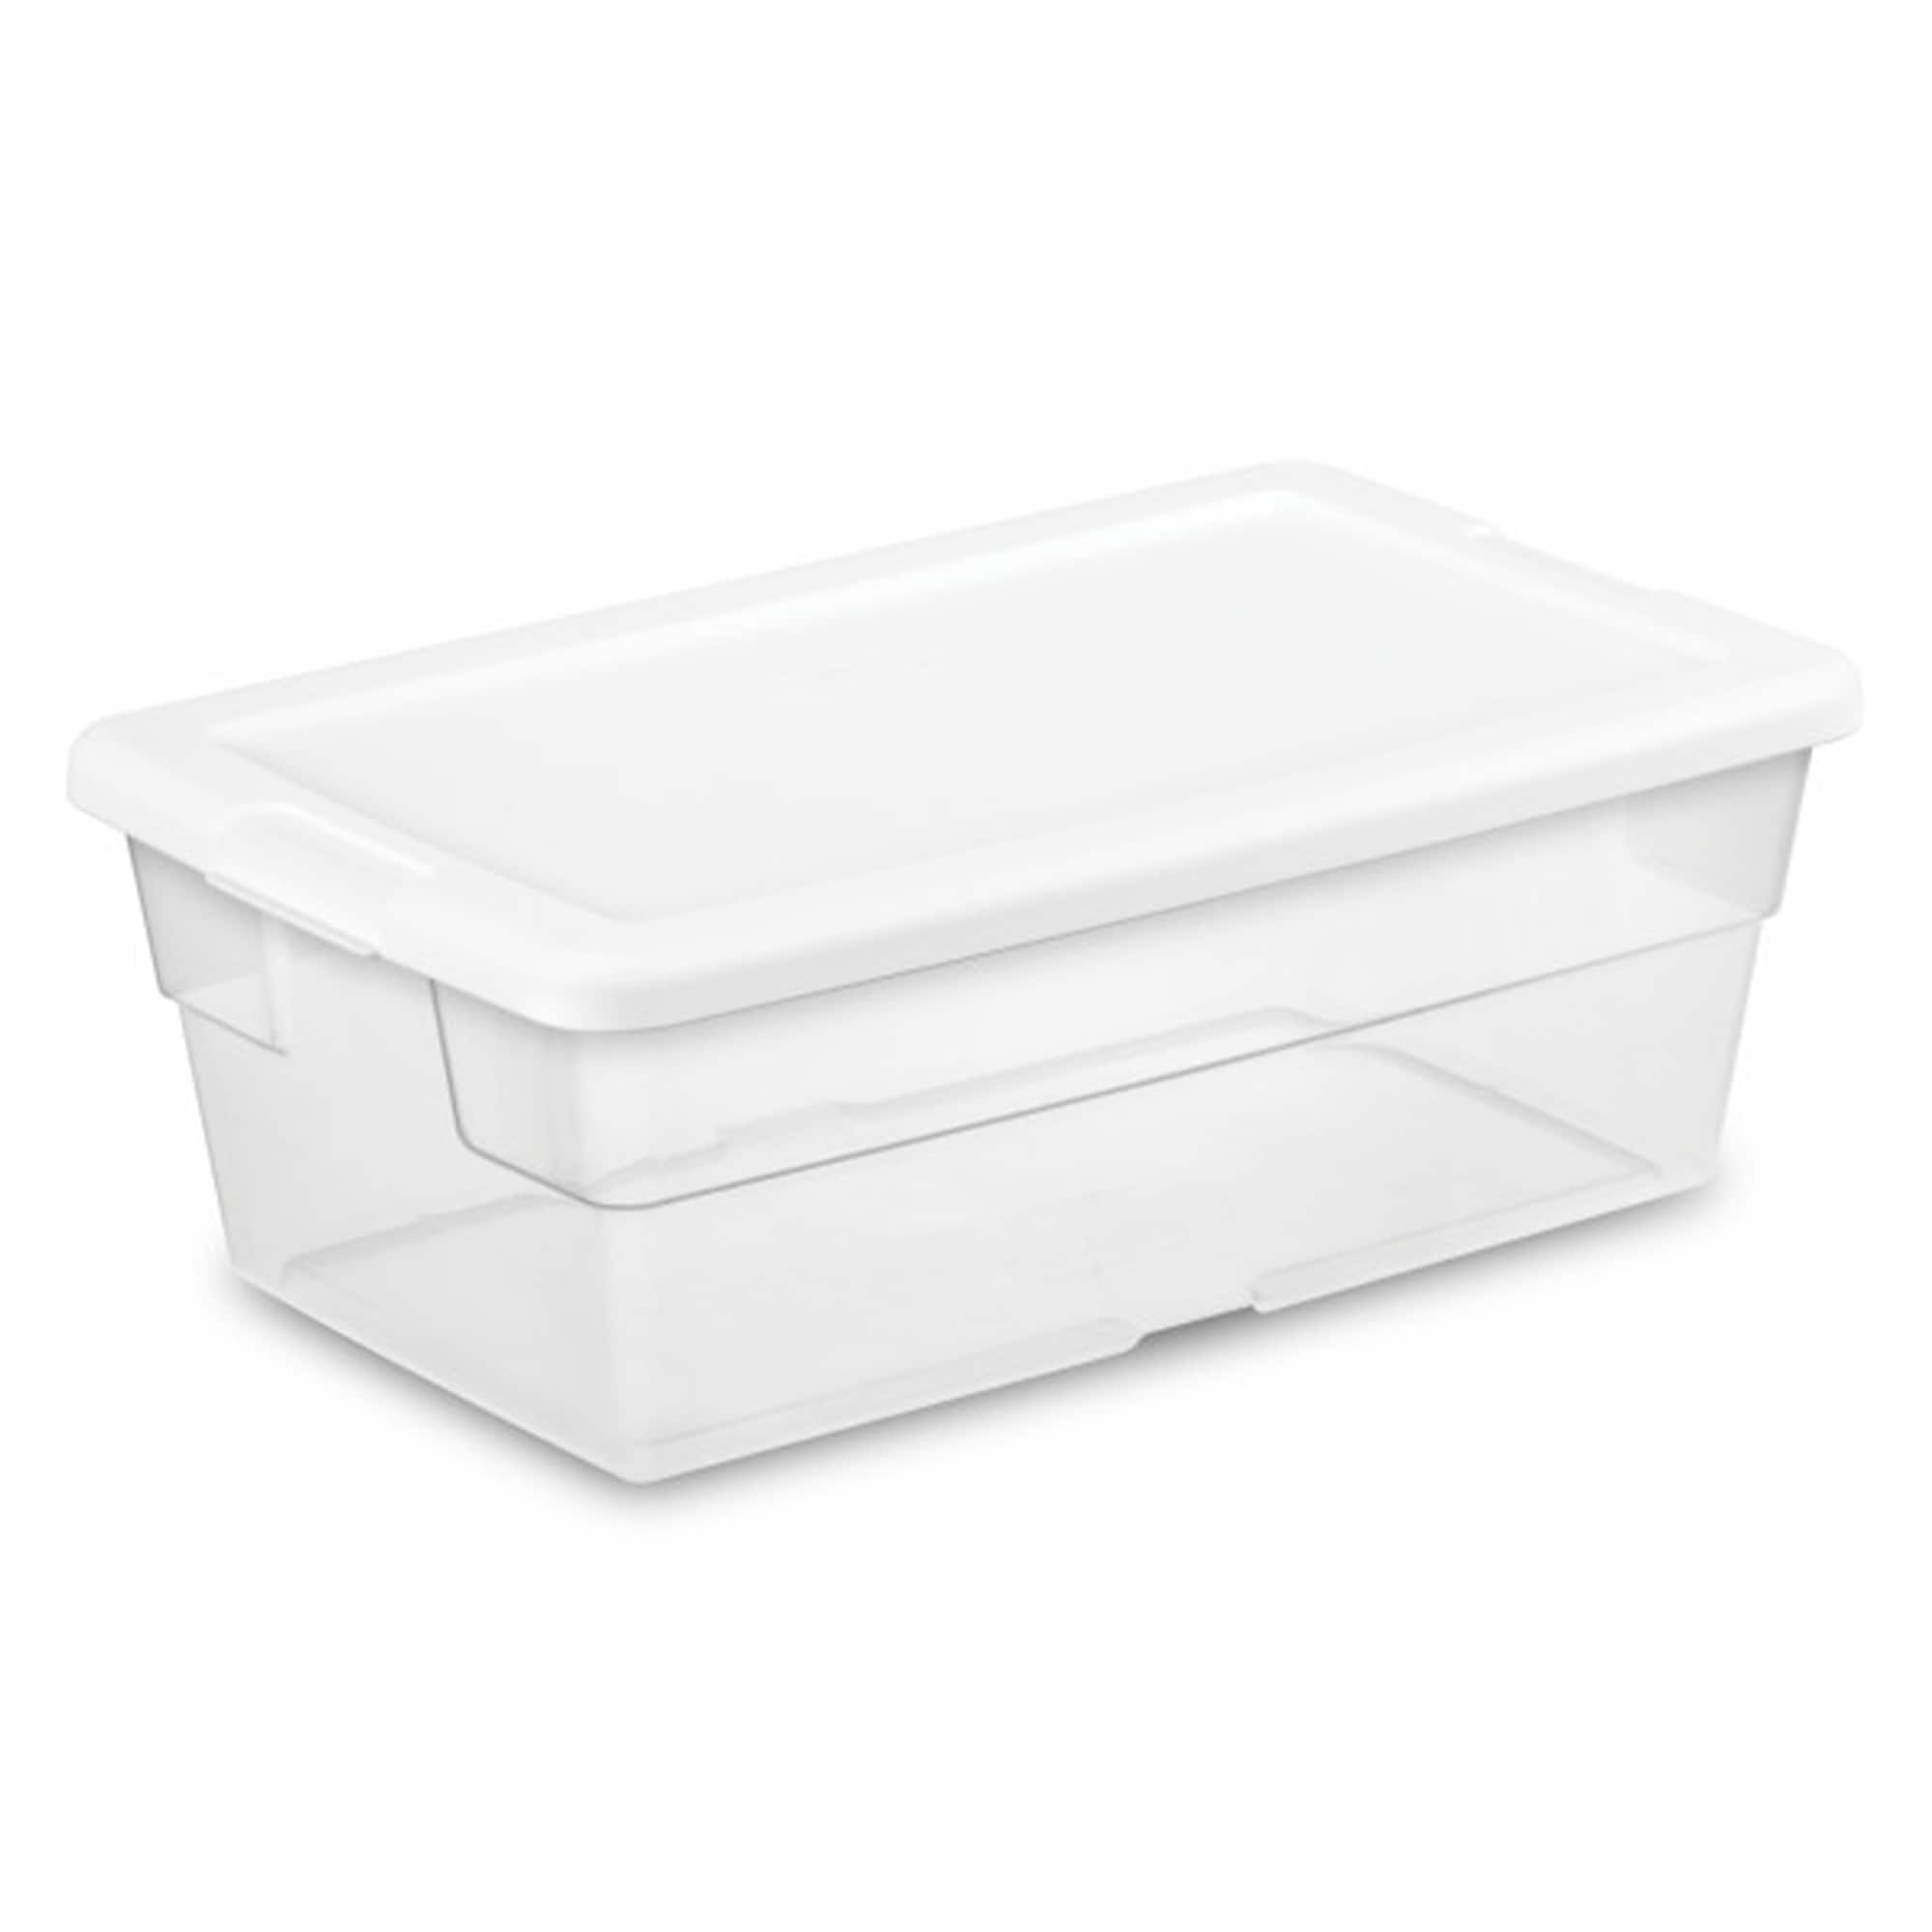 Ziploc 1.25 Qt. Clear Square Food Storage Container with Lids (3